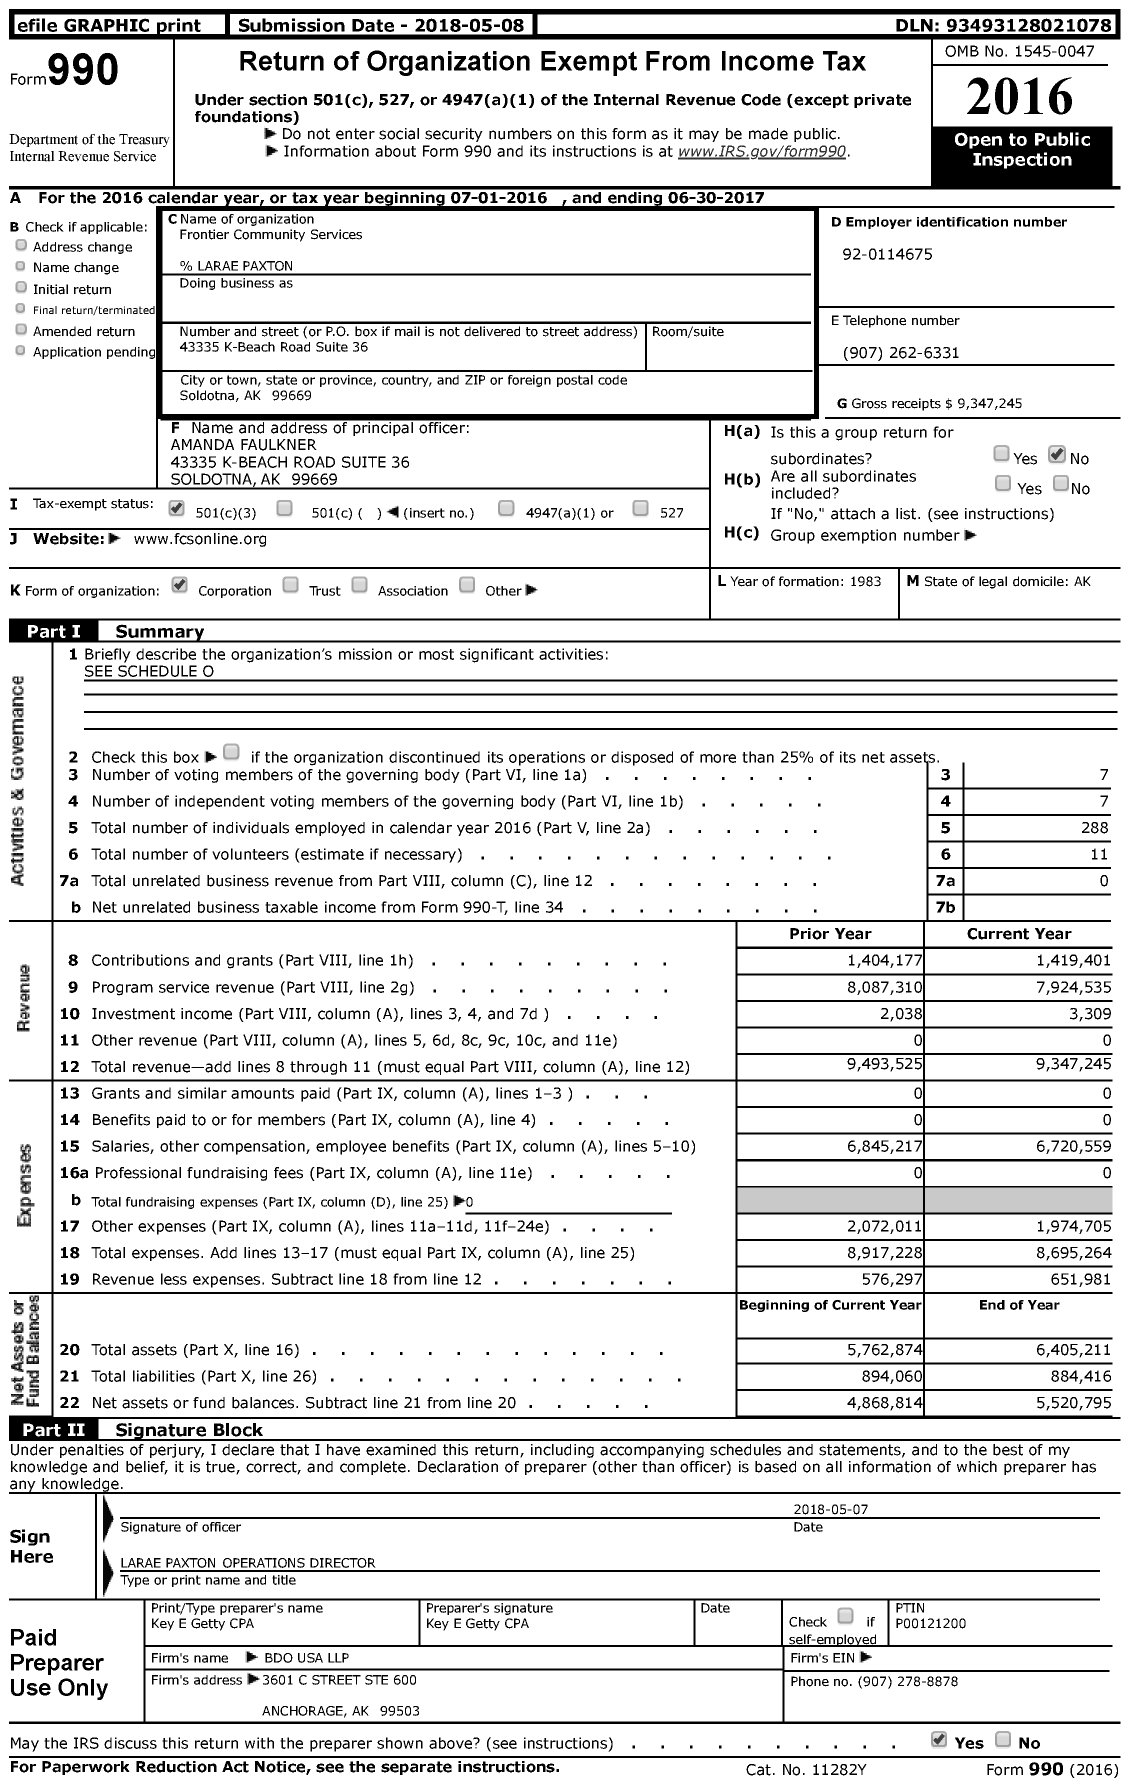 Image of first page of 2016 Form 990 for Frontier Community Services (FCS)